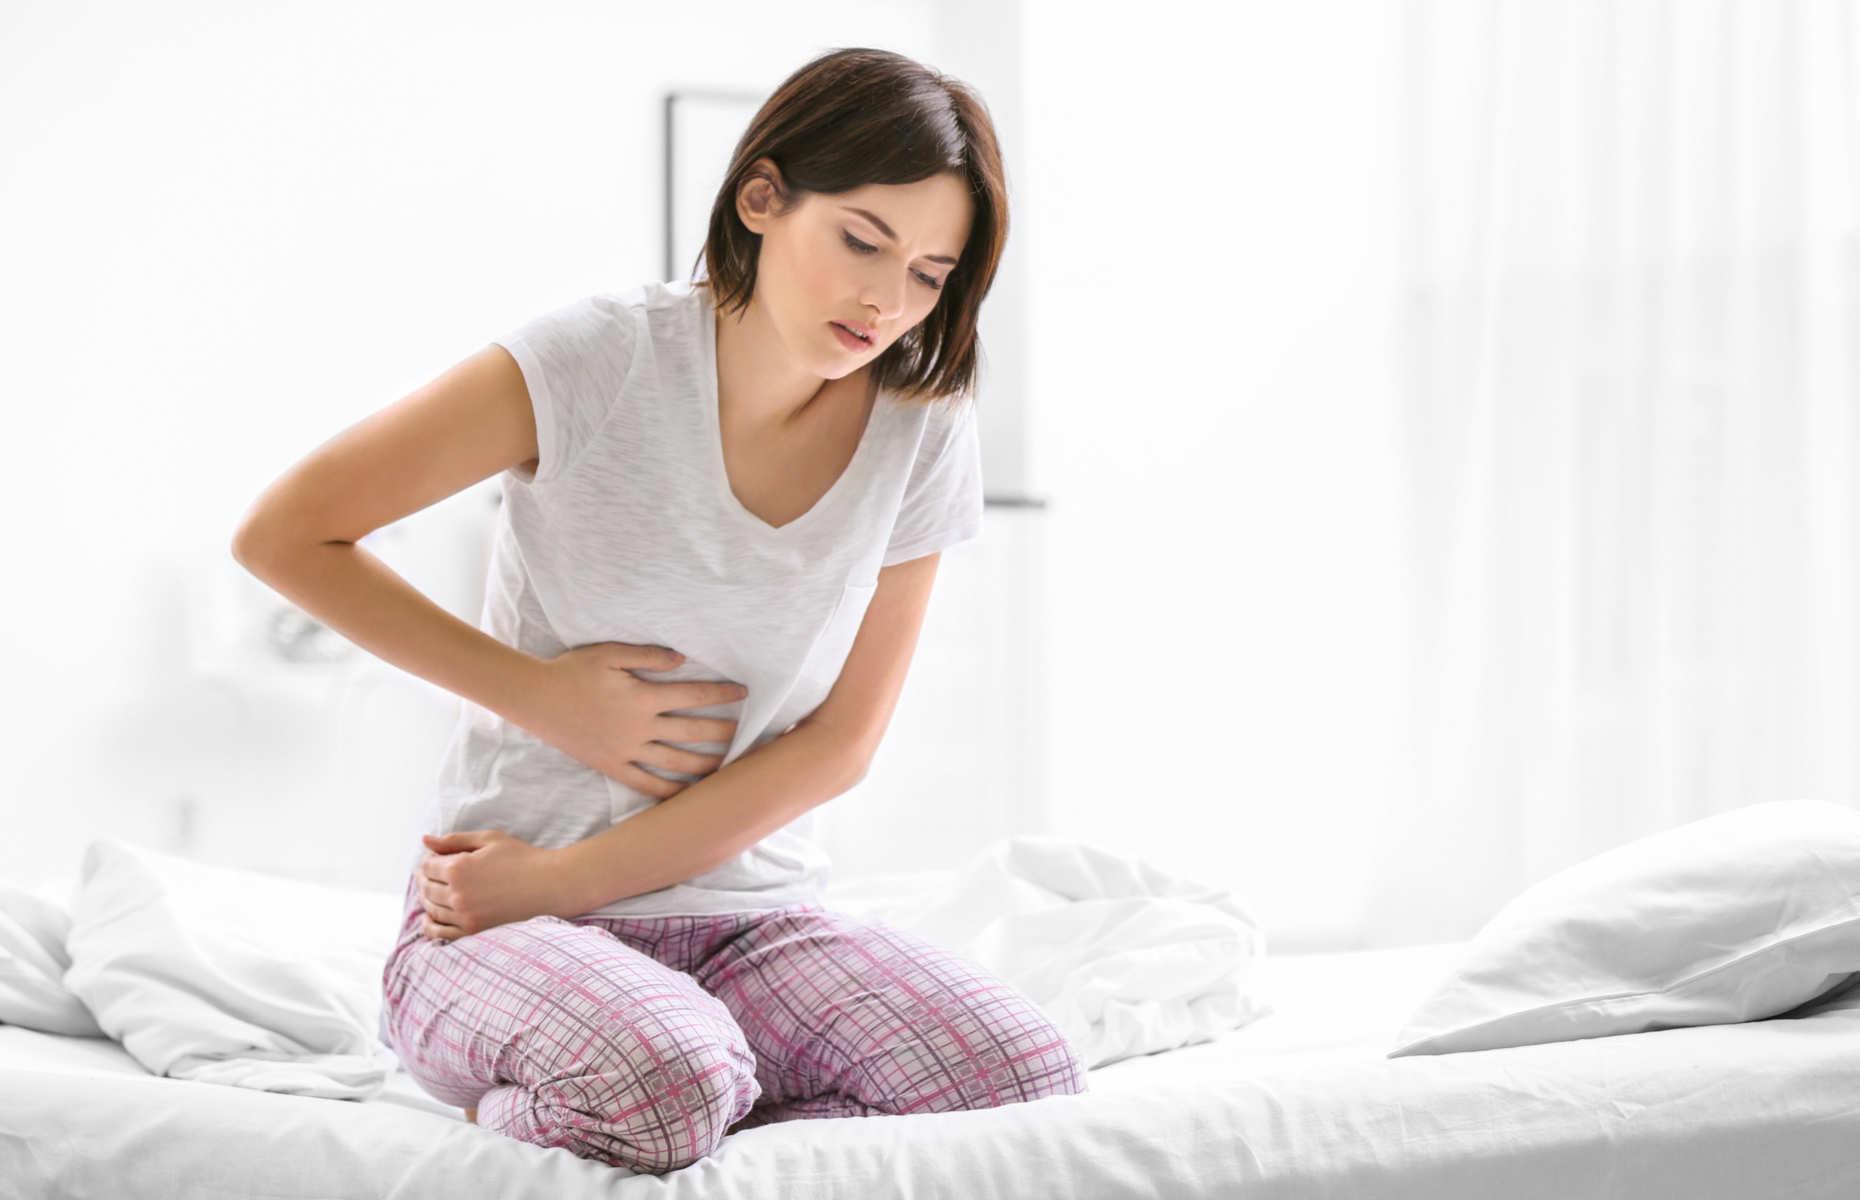 <p>Mild abdominal pain is often something that passes, but if you have <a href="http://www.mayoclinic.org/symptoms/abdominal-pain/basics/when-to-see-doctor/sym-20050728" rel="noreferrer noopener">abdominal pain after a trauma</a>, or with bloody stools, fever, abdominal swelling, persistent nausea and vomiting, and/or severe tenderness when you press on it, seek emergency medical help as soon as possible. There are several conditions that can cause severe abdominal pain including appendicitis, ectopic pregnancy, heart attack, and perforated bowel, among others. Getting help quickly could save your life.</p>